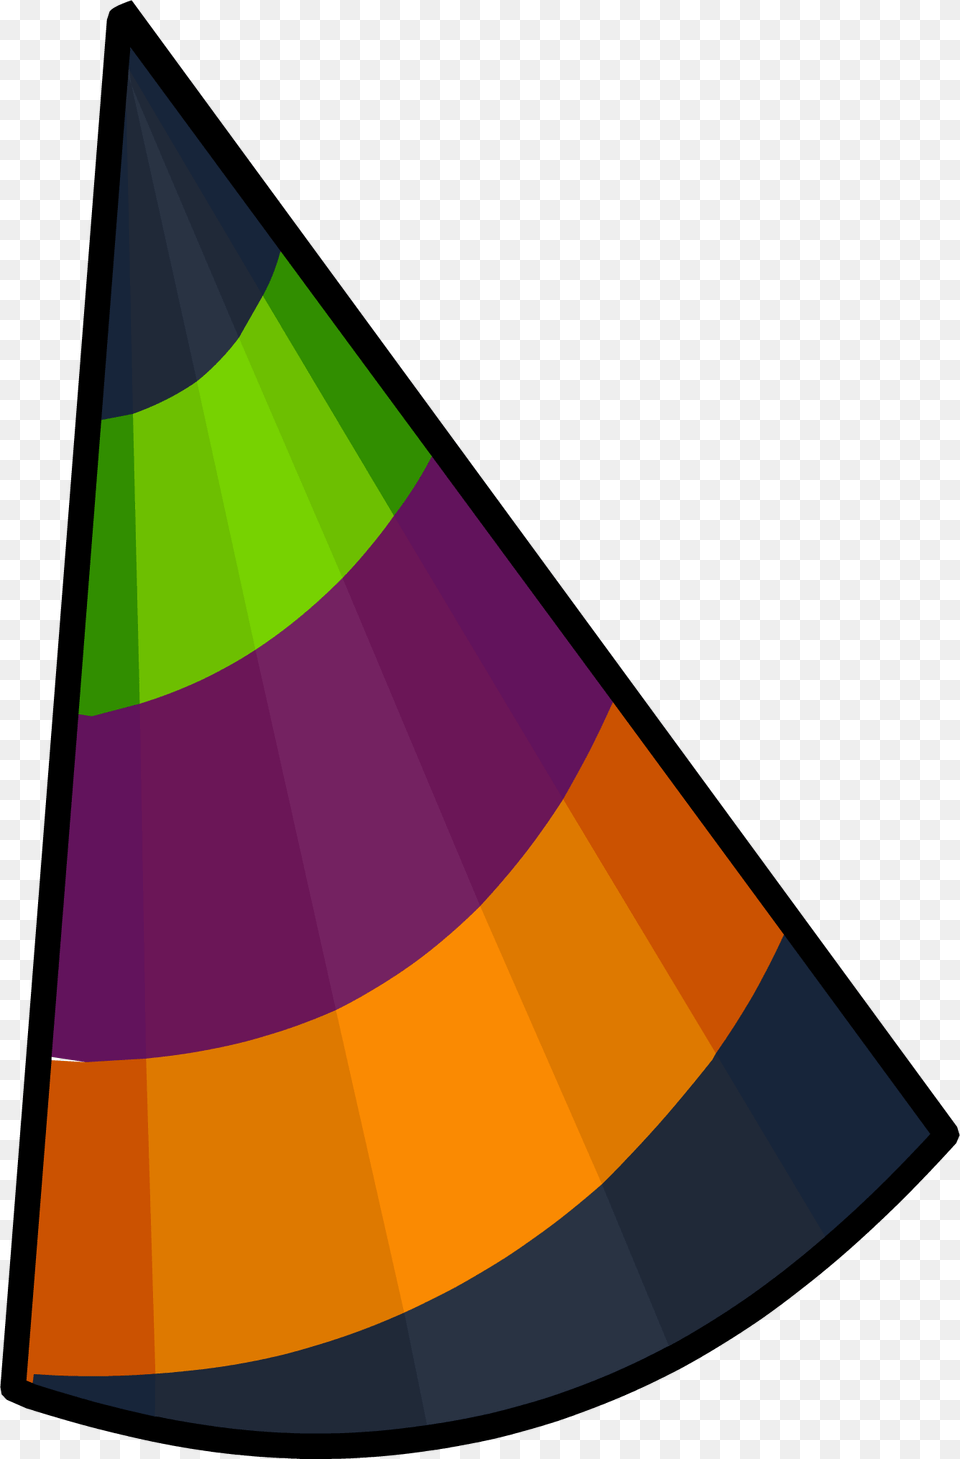 Club Penguin Wiki Club Penguin 6th Anniversary Party, Clothing, Hat, Rocket, Weapon Png Image